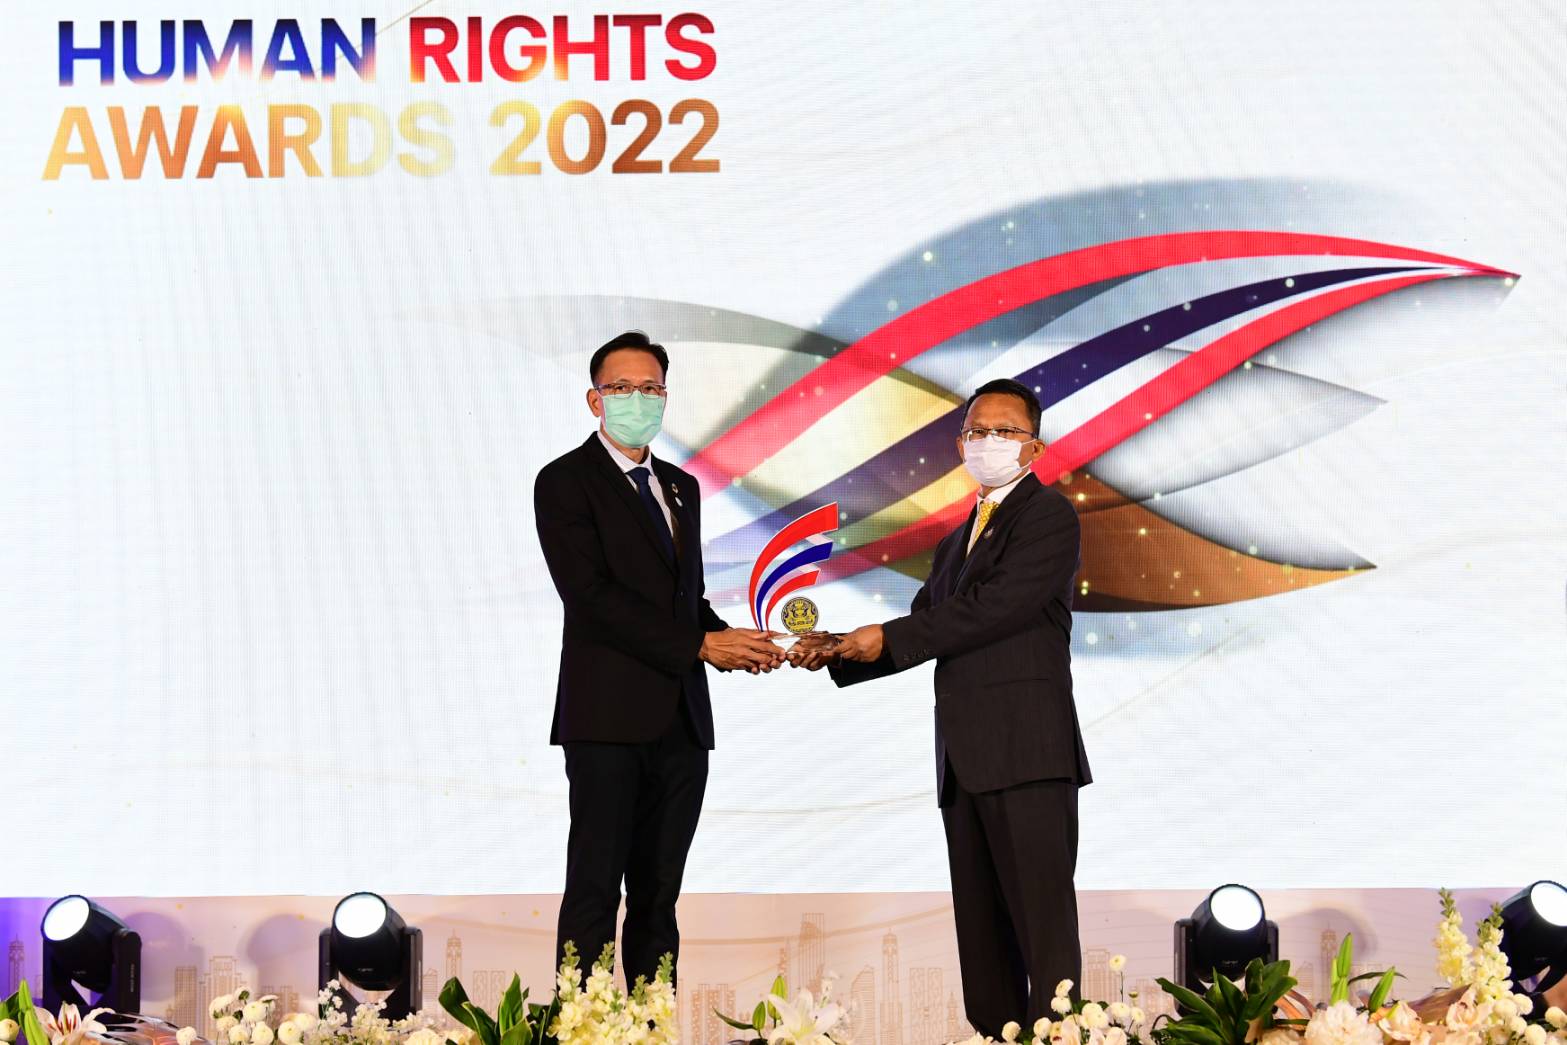 CP Foods honored as a role model by winning the Human Rights Awards in 2022.